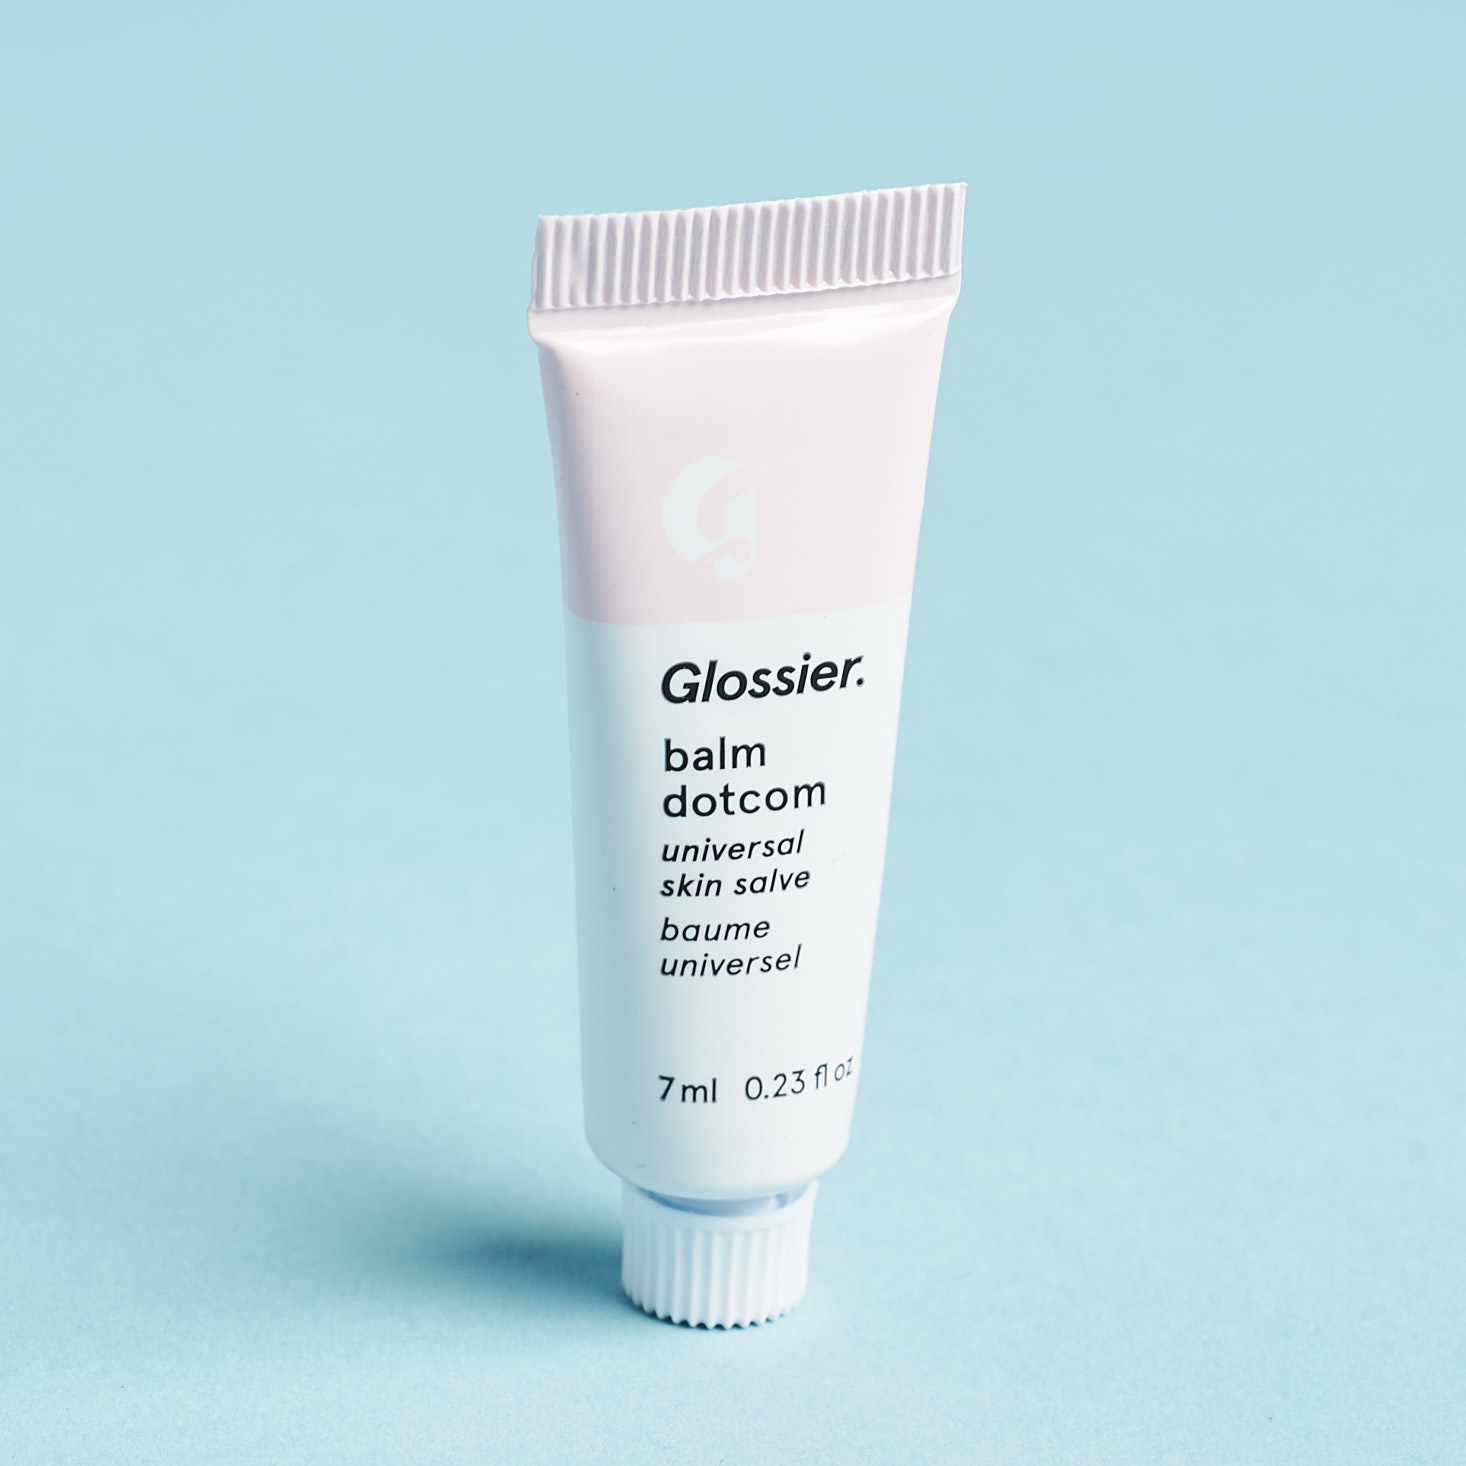 Glossier Limited Edition Skincare Edit Review - January 2020